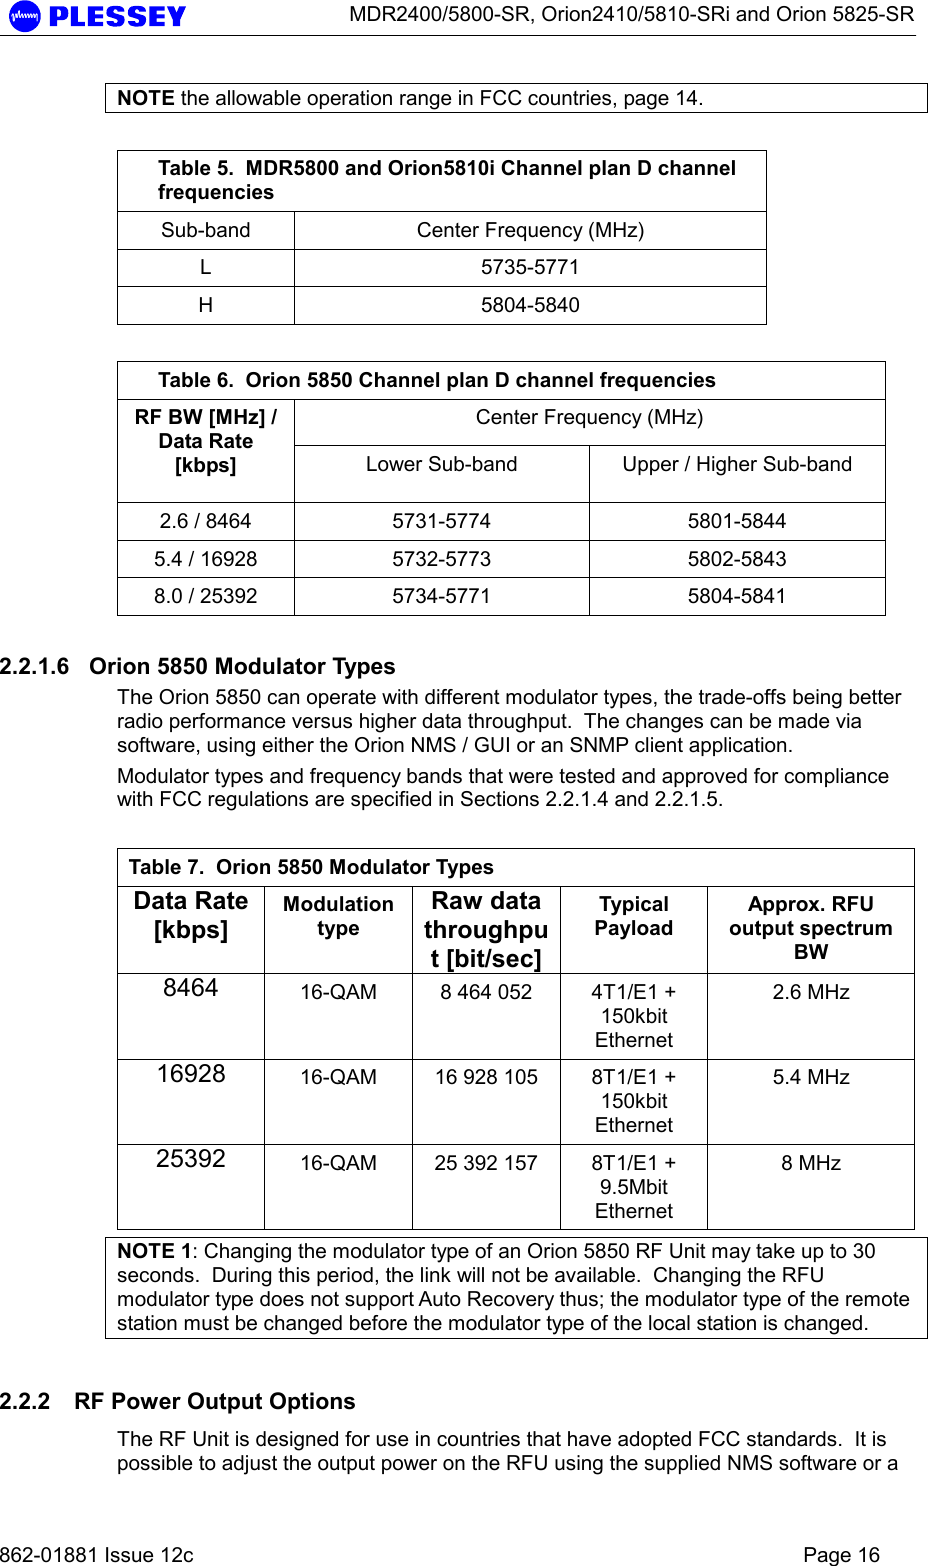      MDR2400/5800-SR, Orion2410/5810-SRi and Orion 5825-SR   862-01881 Issue 12c    Page 16 NOTE the allowable operation range in FCC countries, page 14.  Table 5.  MDR5800 and Orion5810i Channel plan D channel frequencies Sub-band  Center Frequency (MHz) L 5735-5771 H 5804-5840  Table 6.  Orion 5850 Channel plan D channel frequencies Center Frequency (MHz) RF BW [MHz] / Data Rate [kbps]  Lower Sub-band  Upper / Higher Sub-band 2.6 / 8464  5731-5774  5801-5844 5.4 / 16928  5732-5773  5802-5843 8.0 / 25392  5734-5771  5804-5841 2.2.1.6  Orion 5850 Modulator Types The Orion 5850 can operate with different modulator types, the trade-offs being better radio performance versus higher data throughput.  The changes can be made via software, using either the Orion NMS / GUI or an SNMP client application. Modulator types and frequency bands that were tested and approved for compliance with FCC regulations are specified in Sections 2.2.1.4 and 2.2.1.5.  Table 7.  Orion 5850 Modulator Types Data Rate [kbps] Modulation type Raw data throughput [bit/sec] Typical Payload Approx. RFU output spectrum BW 8464  16-QAM  8 464 052  4T1/E1 + 150kbit Ethernet 2.6 MHz 16928  16-QAM  16 928 105  8T1/E1 + 150kbit Ethernet 5.4 MHz 25392  16-QAM  25 392 157  8T1/E1 + 9.5Mbit Ethernet 8 MHz NOTE 1: Changing the modulator type of an Orion 5850 RF Unit may take up to 30 seconds.  During this period, the link will not be available.  Changing the RFU modulator type does not support Auto Recovery thus; the modulator type of the remote station must be changed before the modulator type of the local station is changed. 2.2.2  RF Power Output Options The RF Unit is designed for use in countries that have adopted FCC standards.  It is possible to adjust the output power on the RFU using the supplied NMS software or a 